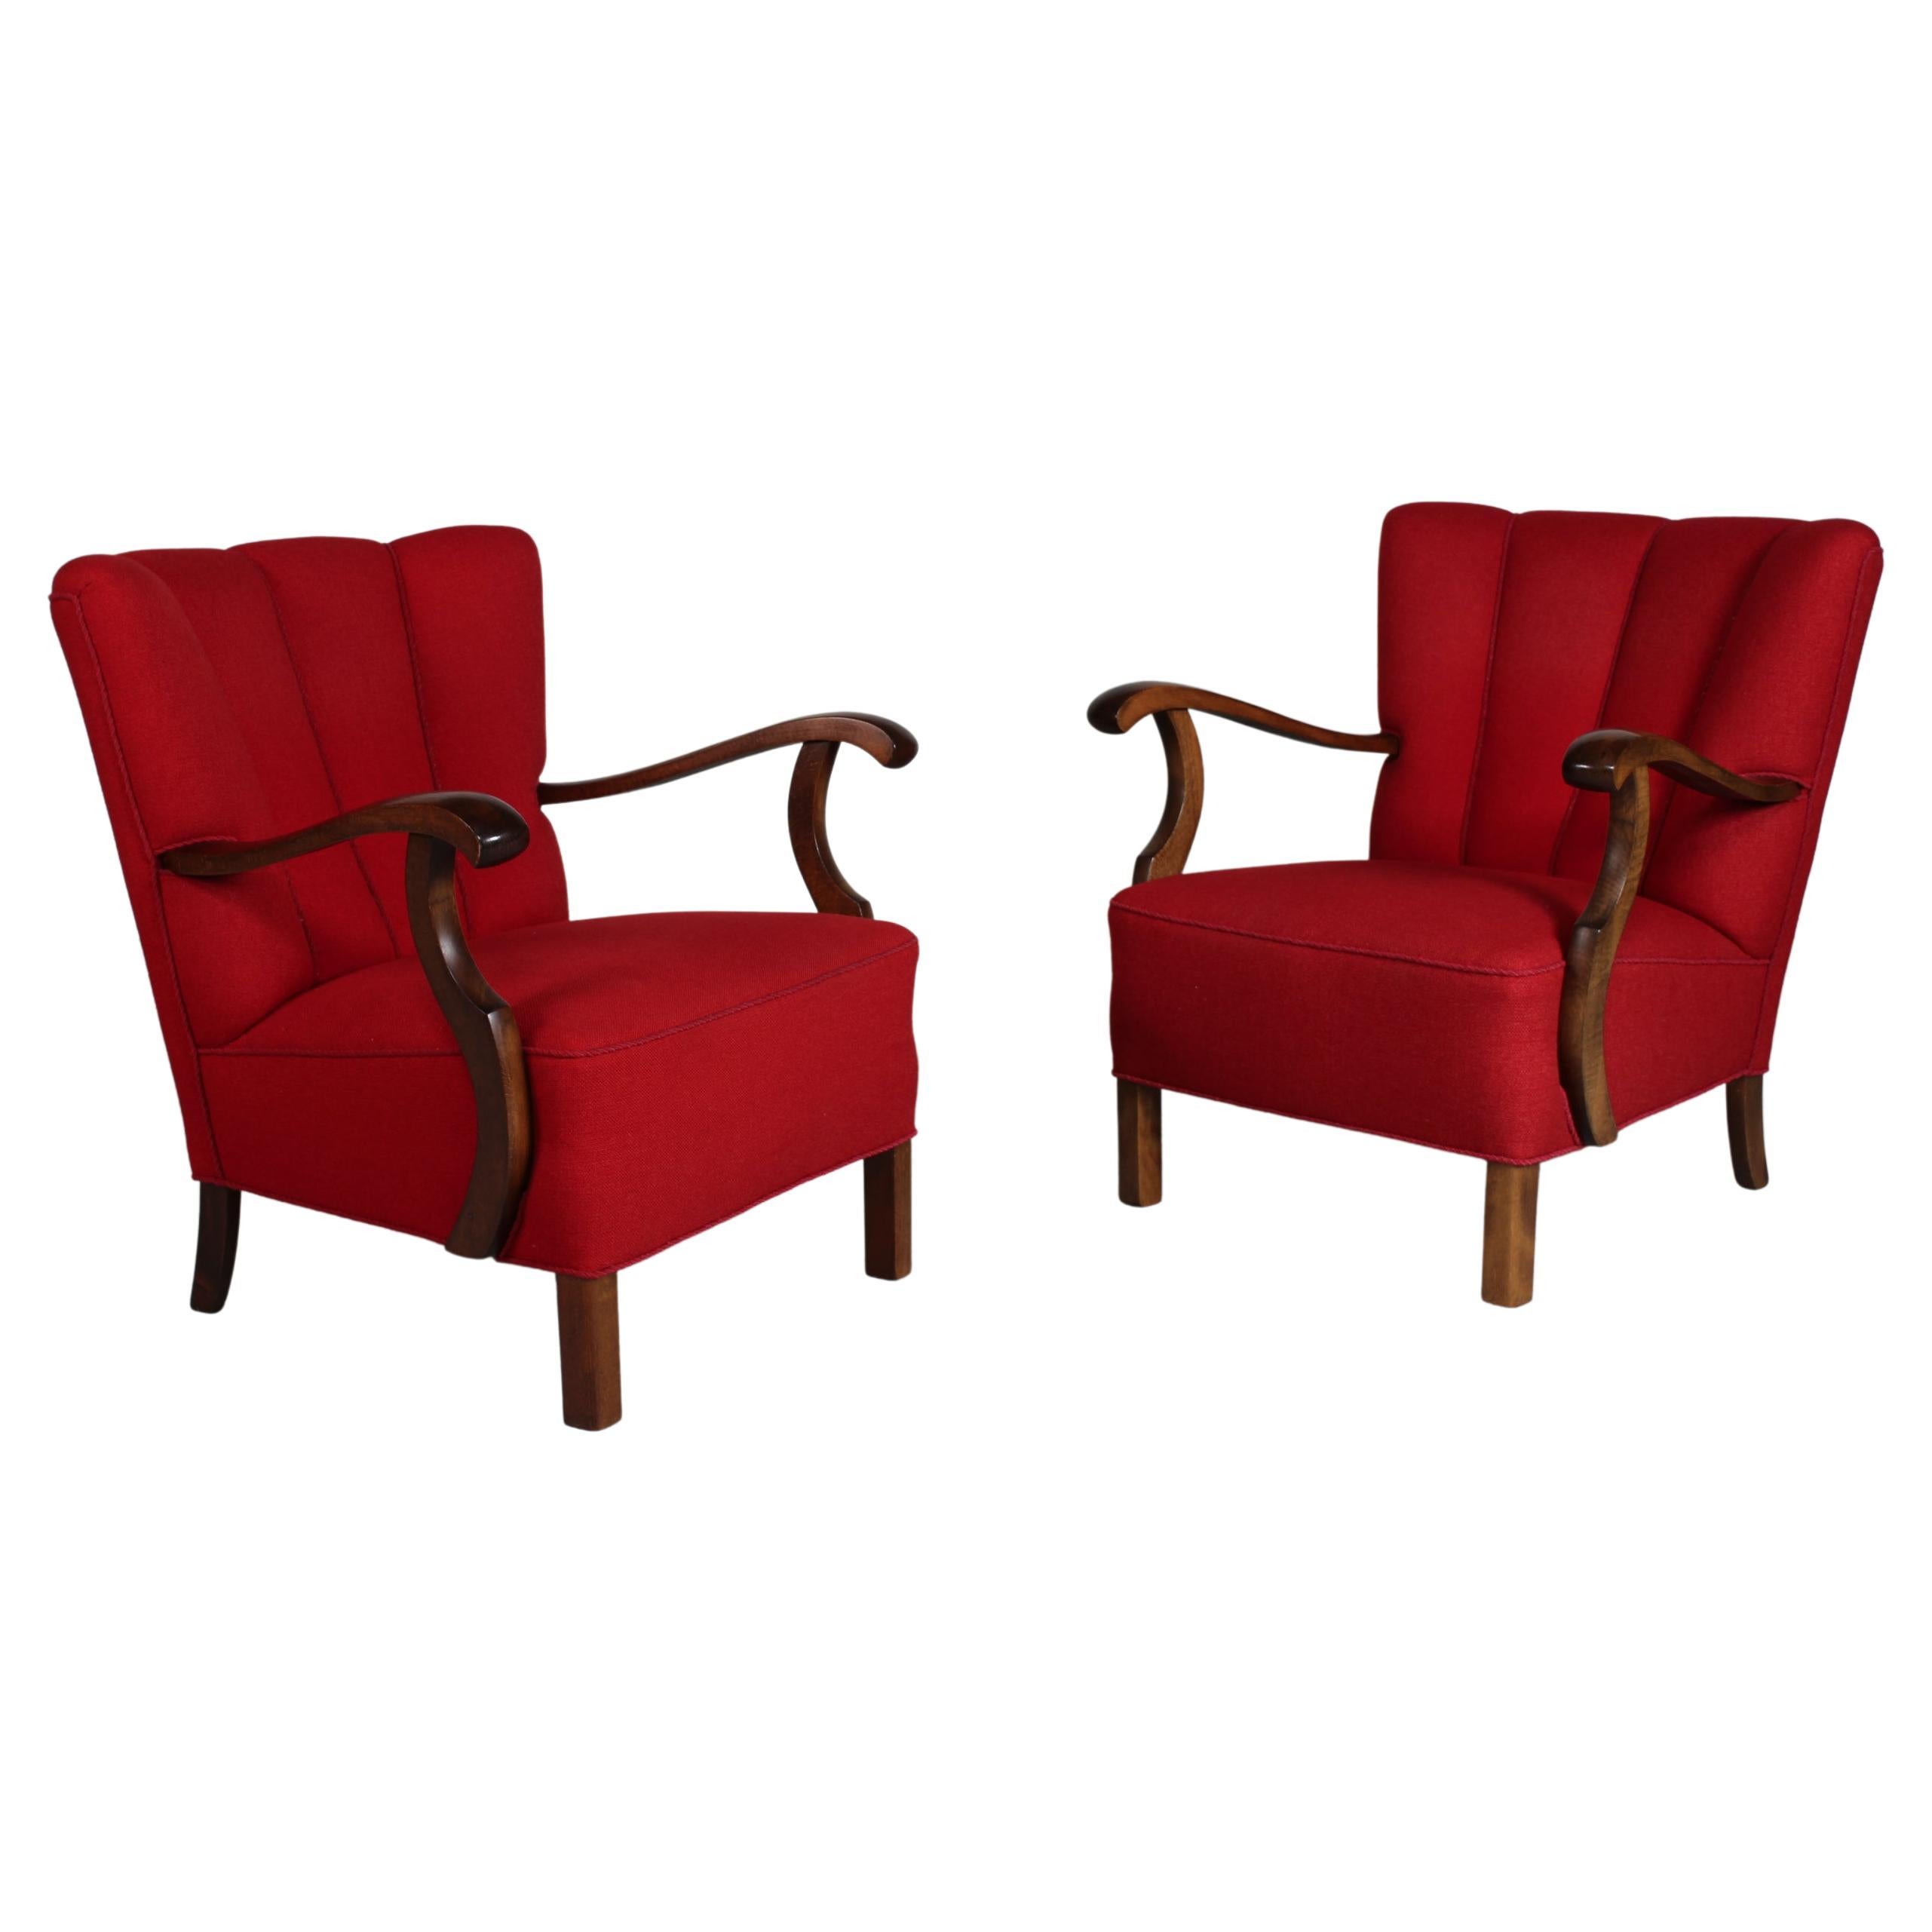 Pair of Art Deco Easy Chairs in Viggo Boesen Style with Red Wool, Denmark 1930's For Sale